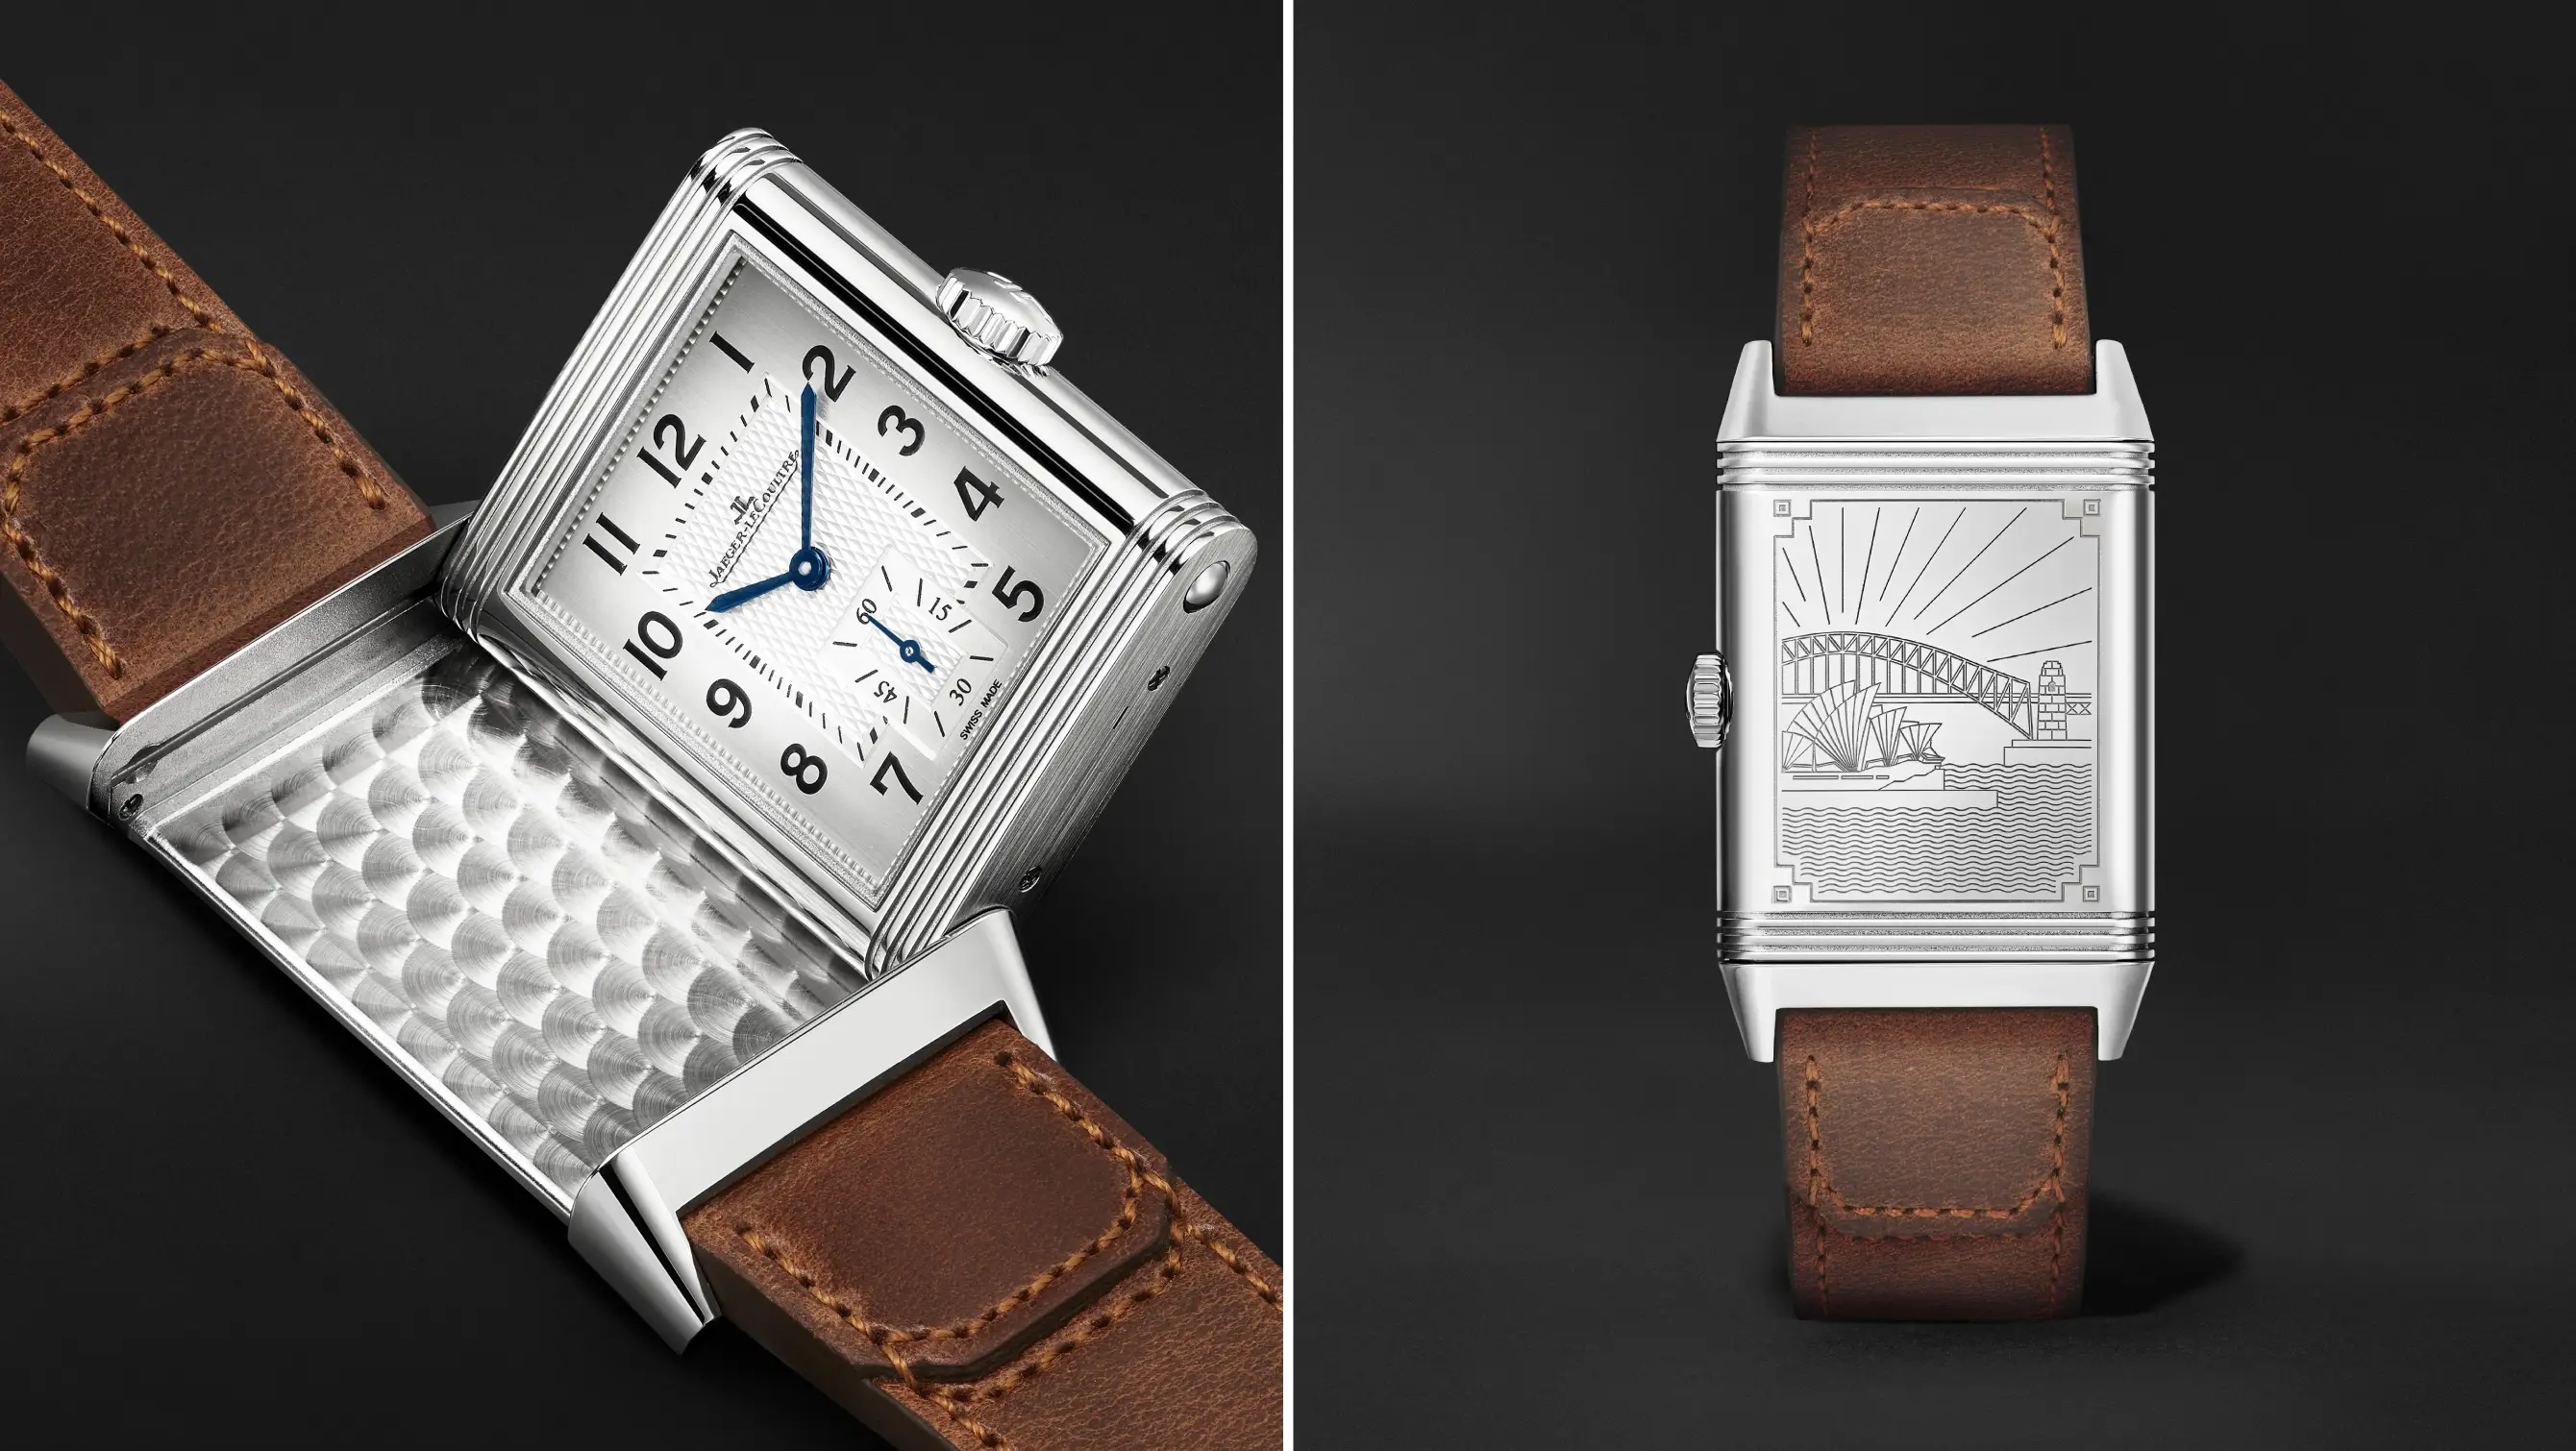 Jaeger-LeCoultre & Mr Porter’s latest watch collaboration pays tribute to the stylish city of Sydney